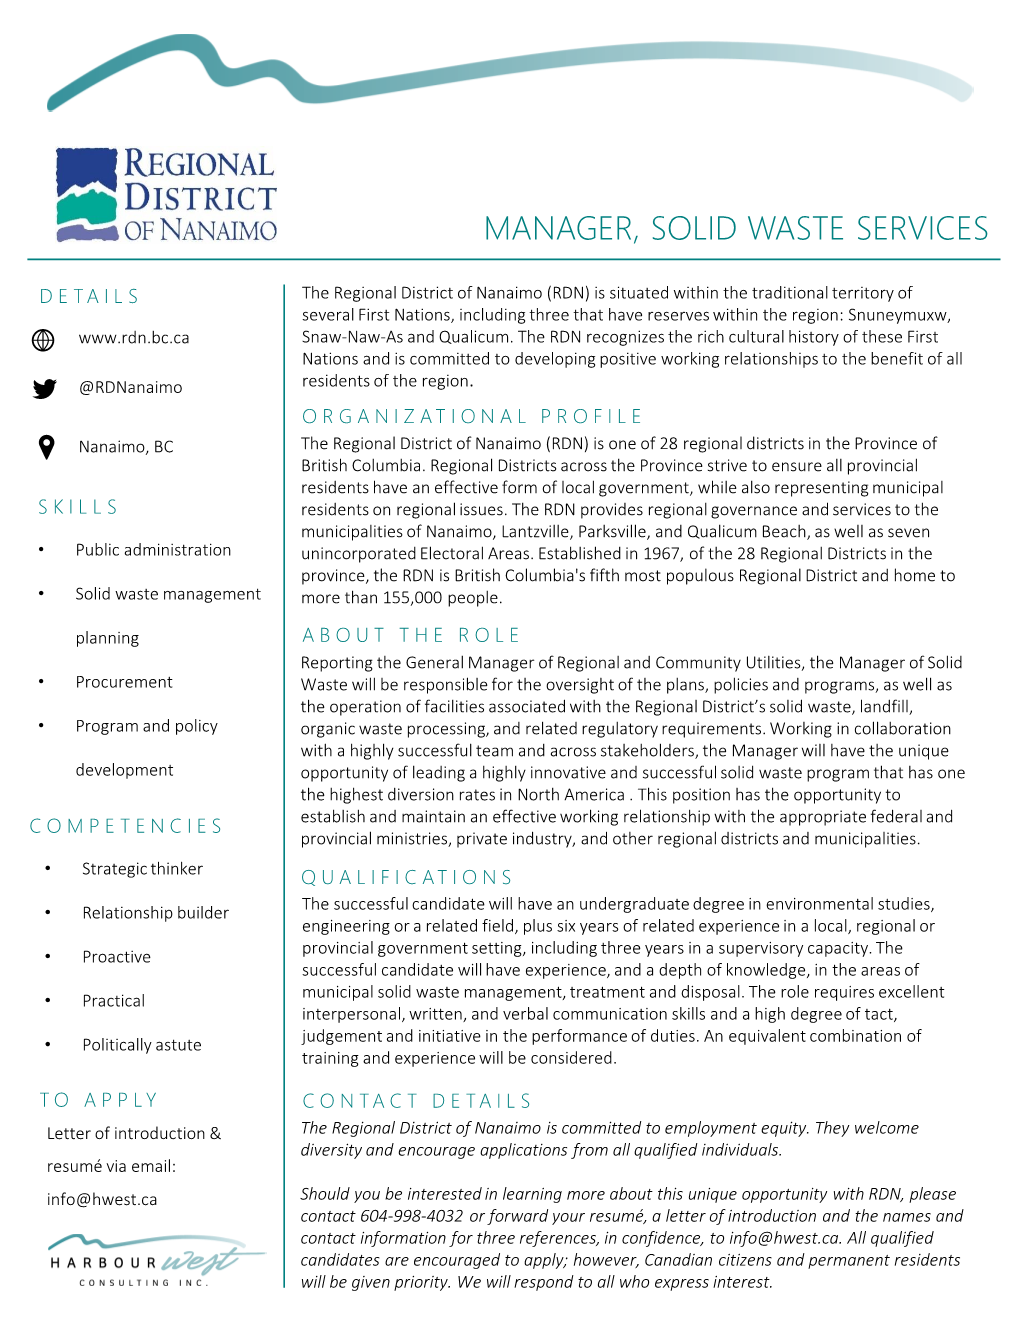 Manager, Solid Waste Services